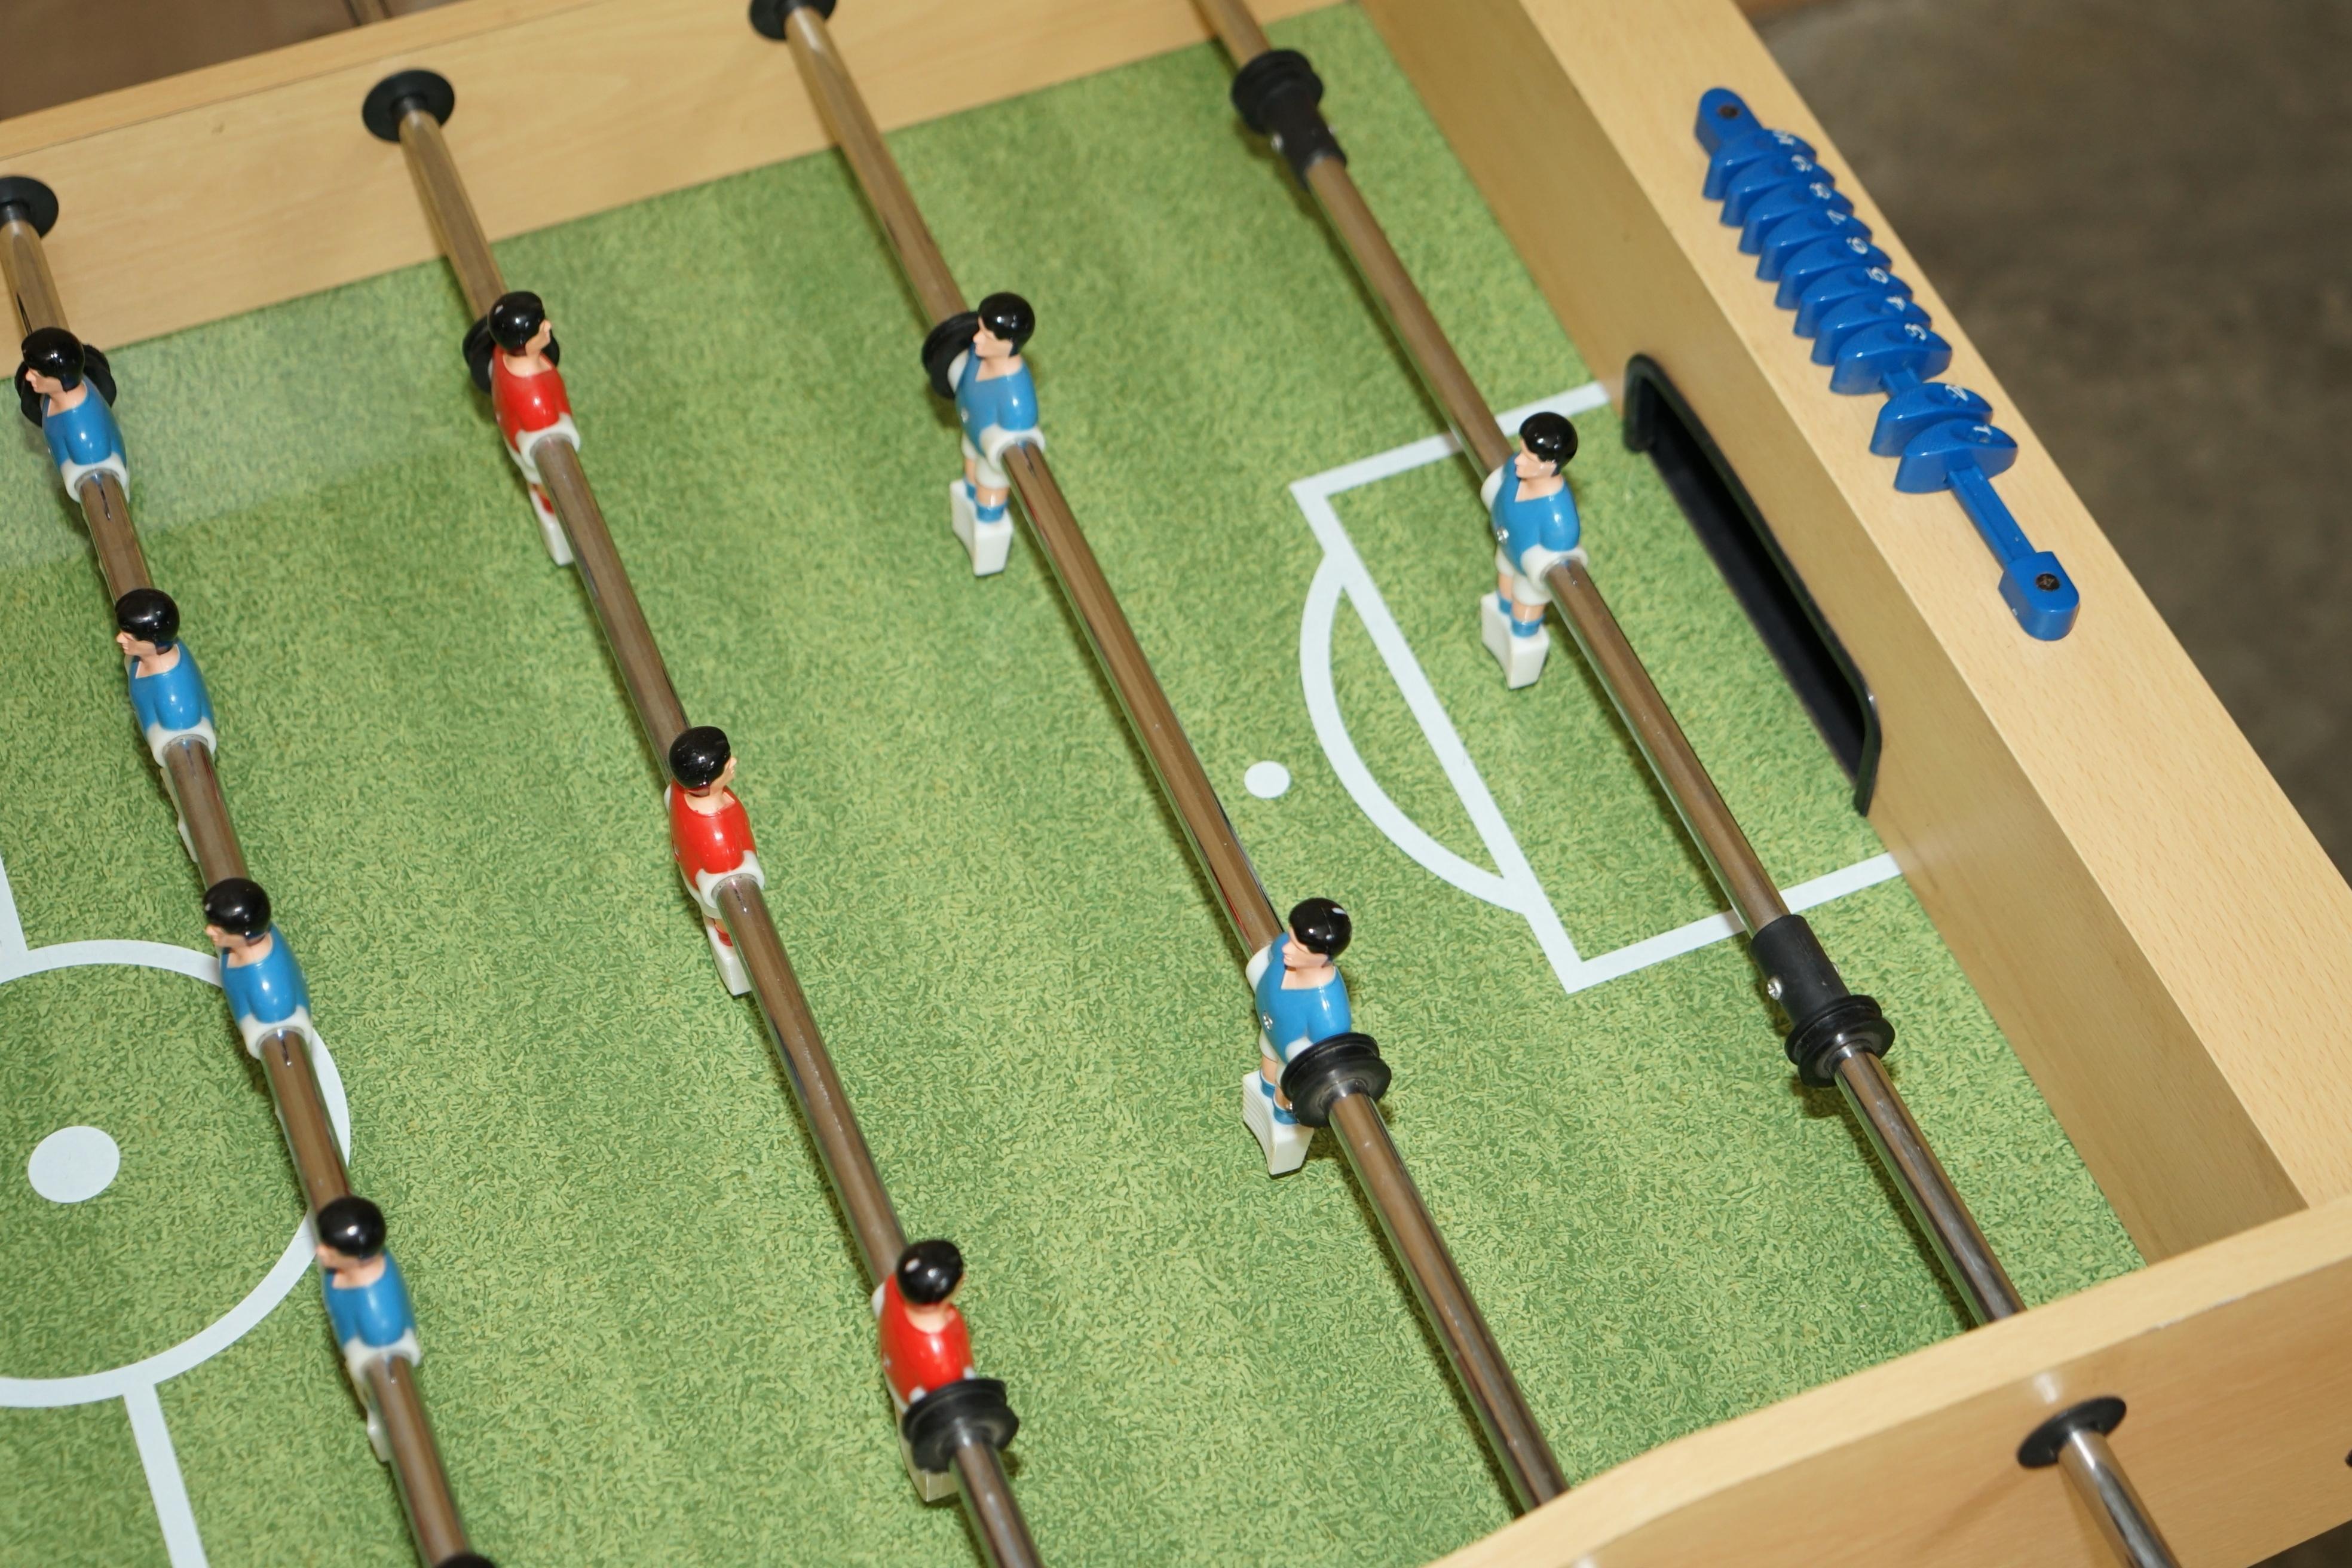 Plastic Table Football / Foosball That Folds Away for Ease of Storage Keep the Kids Busy